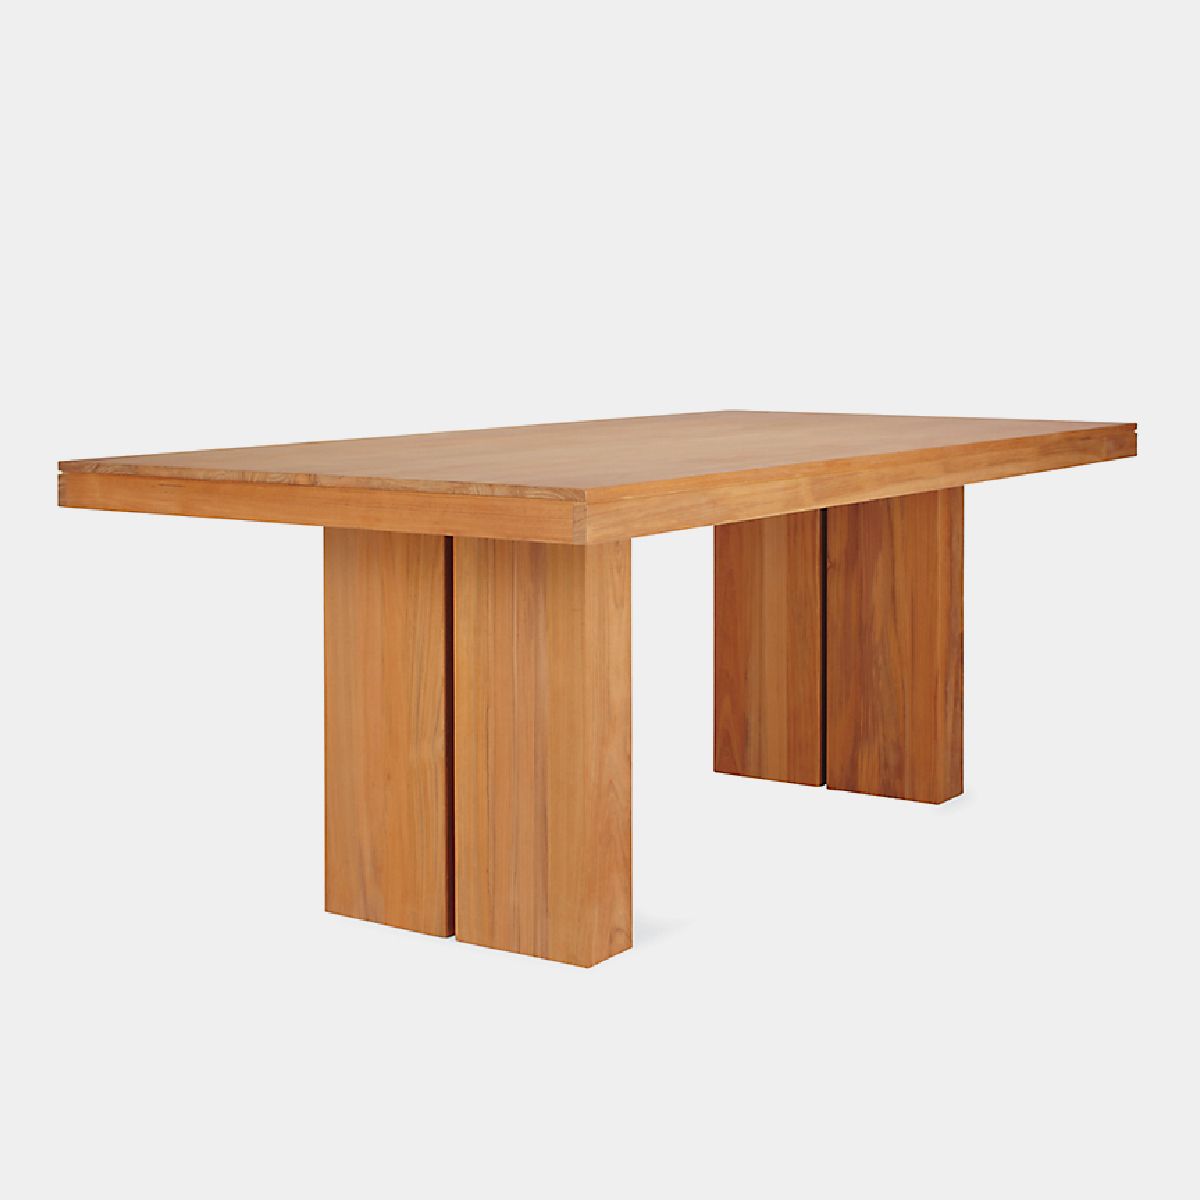 Add To Cart: Dining Tables | All Sorts Of Throughout Most Popular Hearst Oak Wood Dining Tables (View 7 of 25)